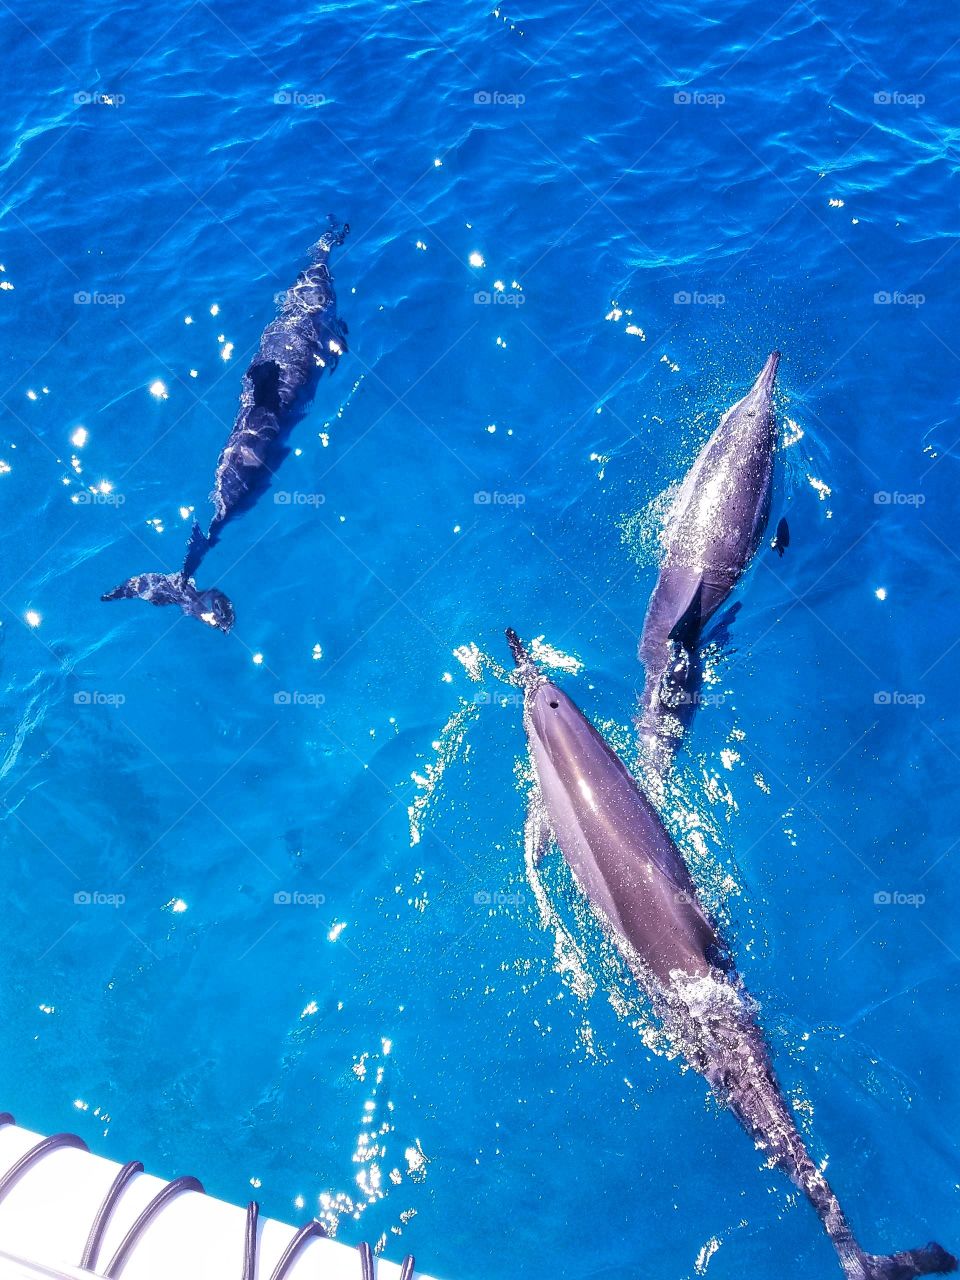 Dolphins in Hawaii